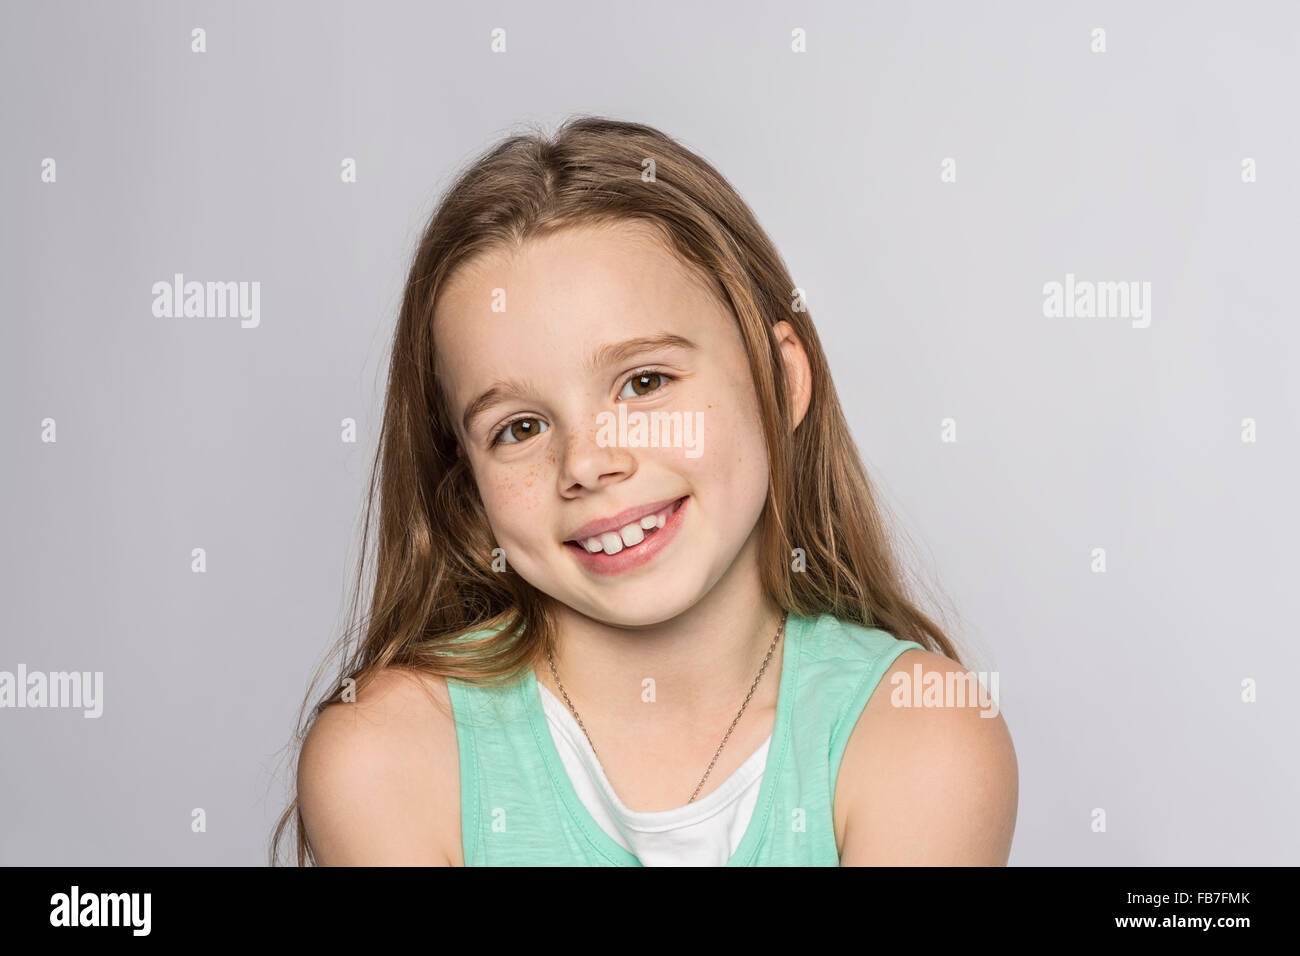 Portrait of happy girl against white background Stock Photo